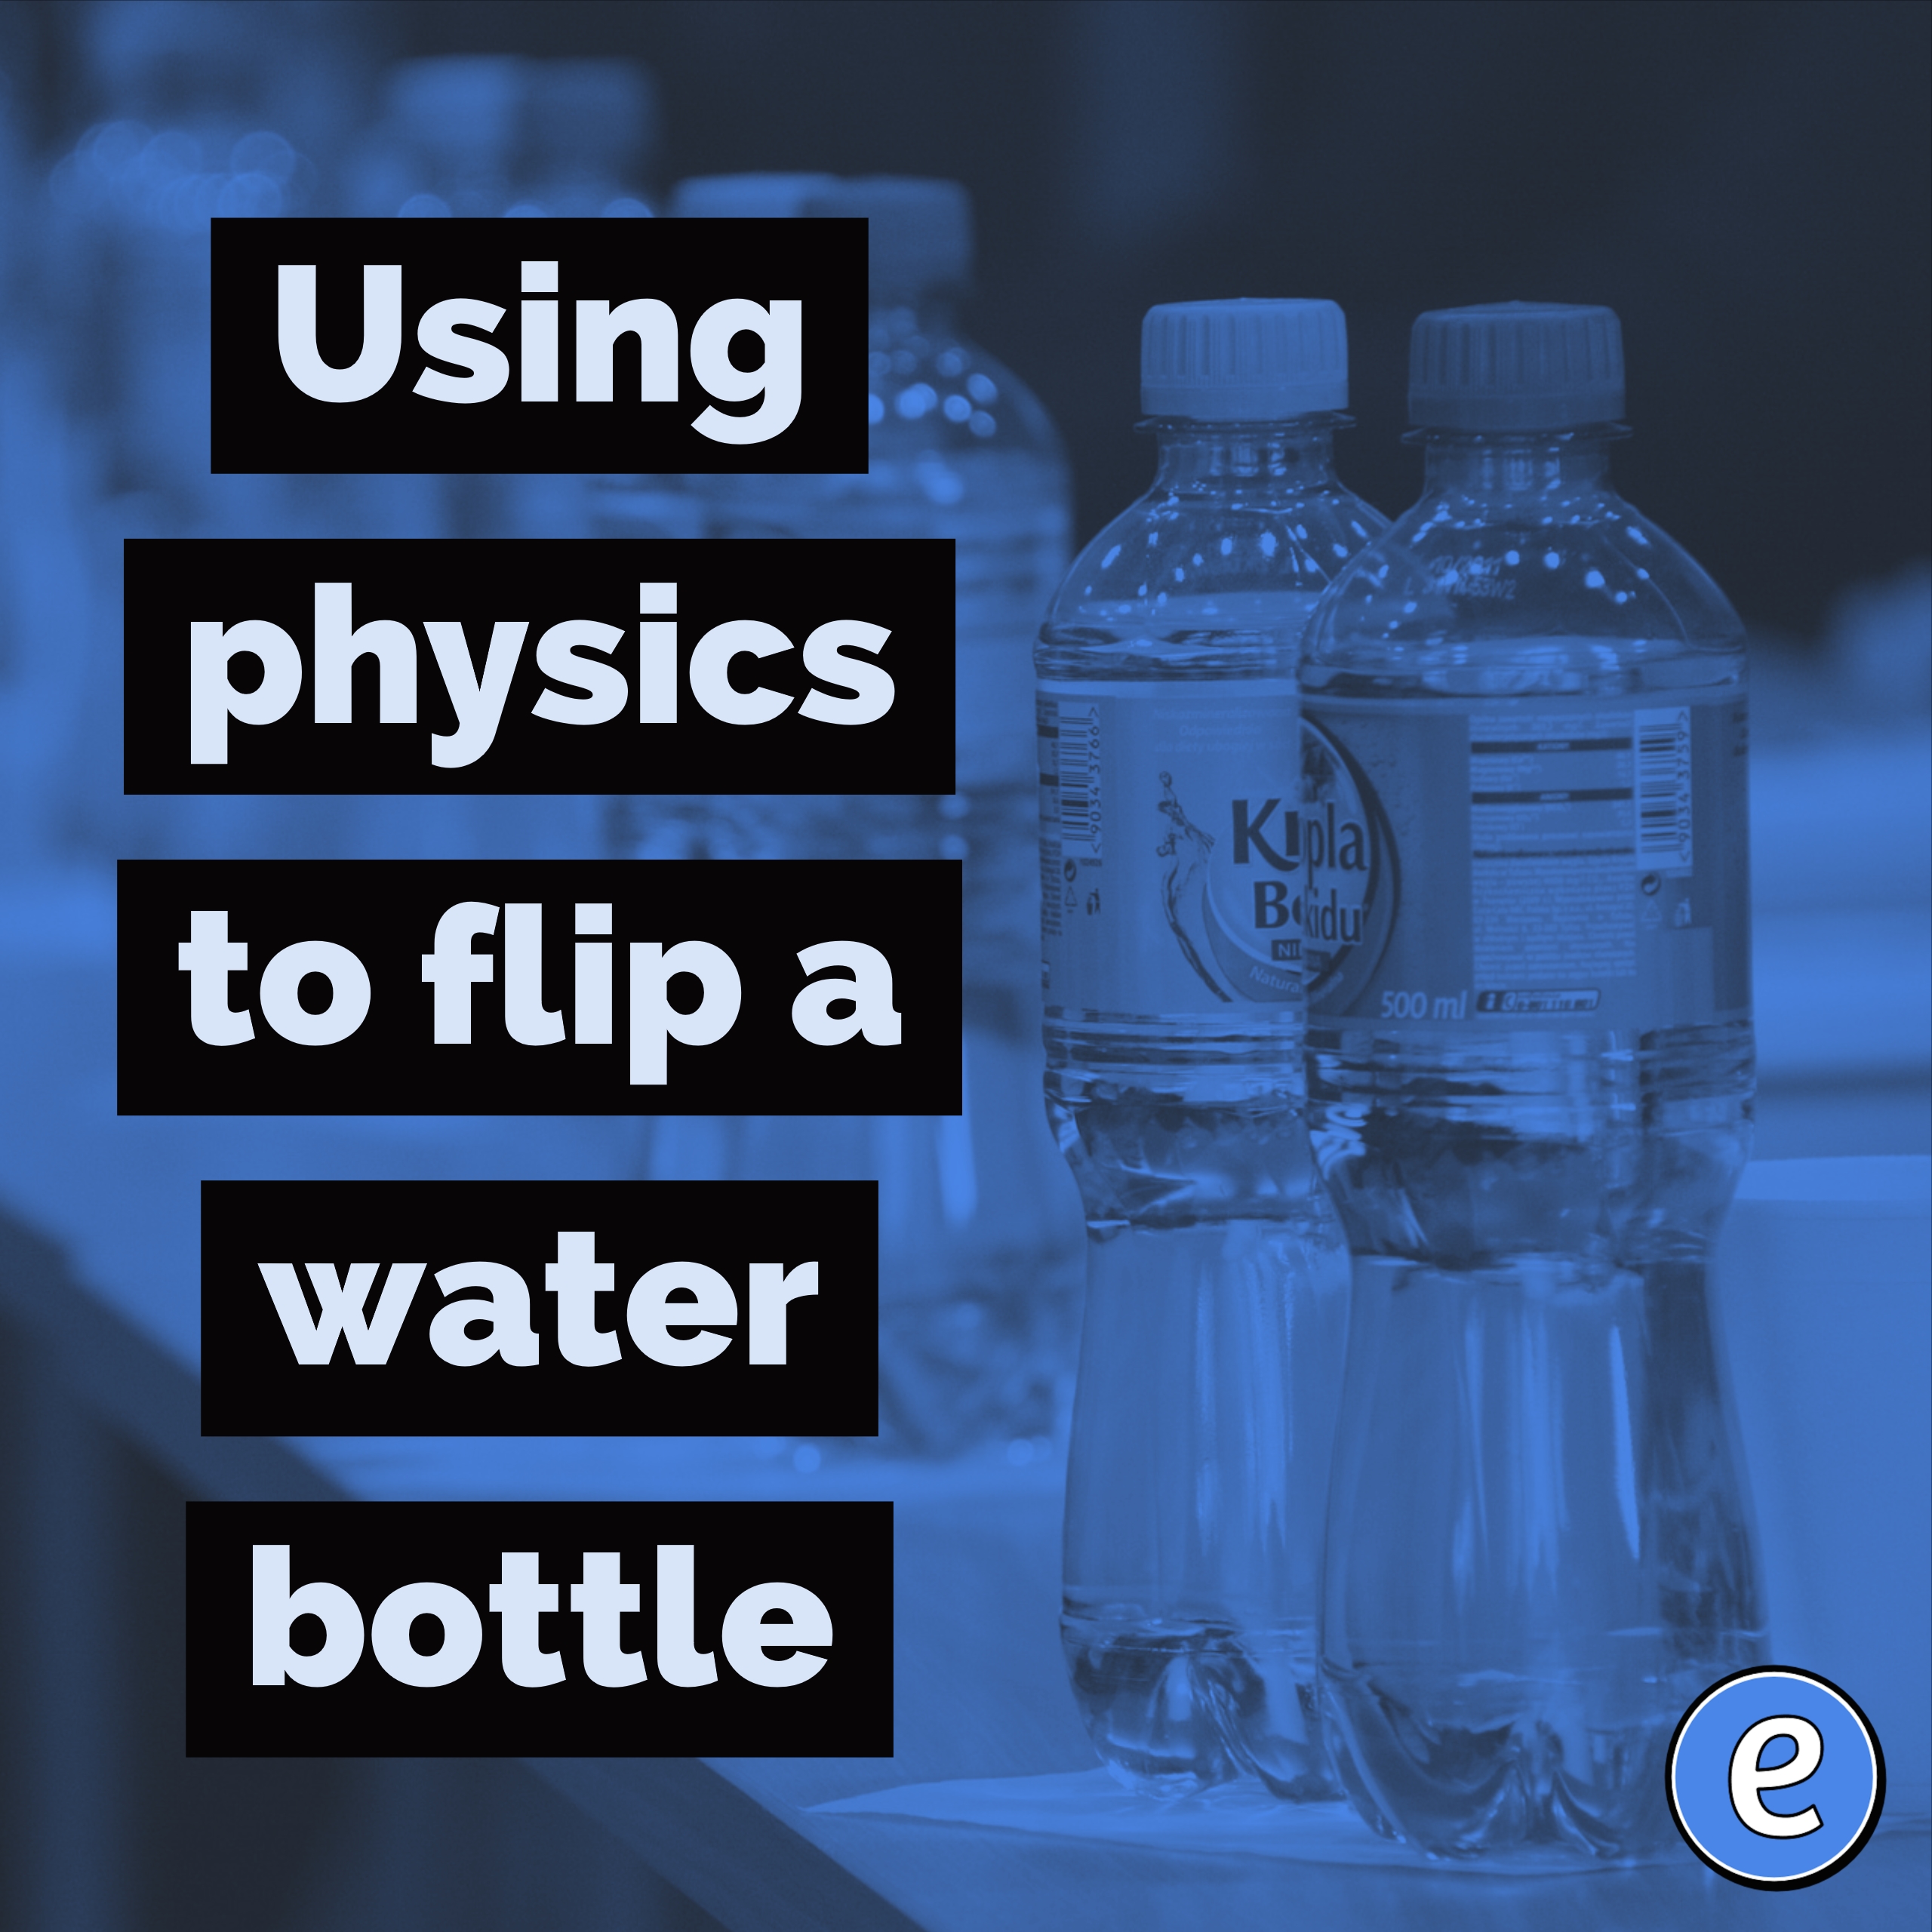 Using physics to flip a water bottle